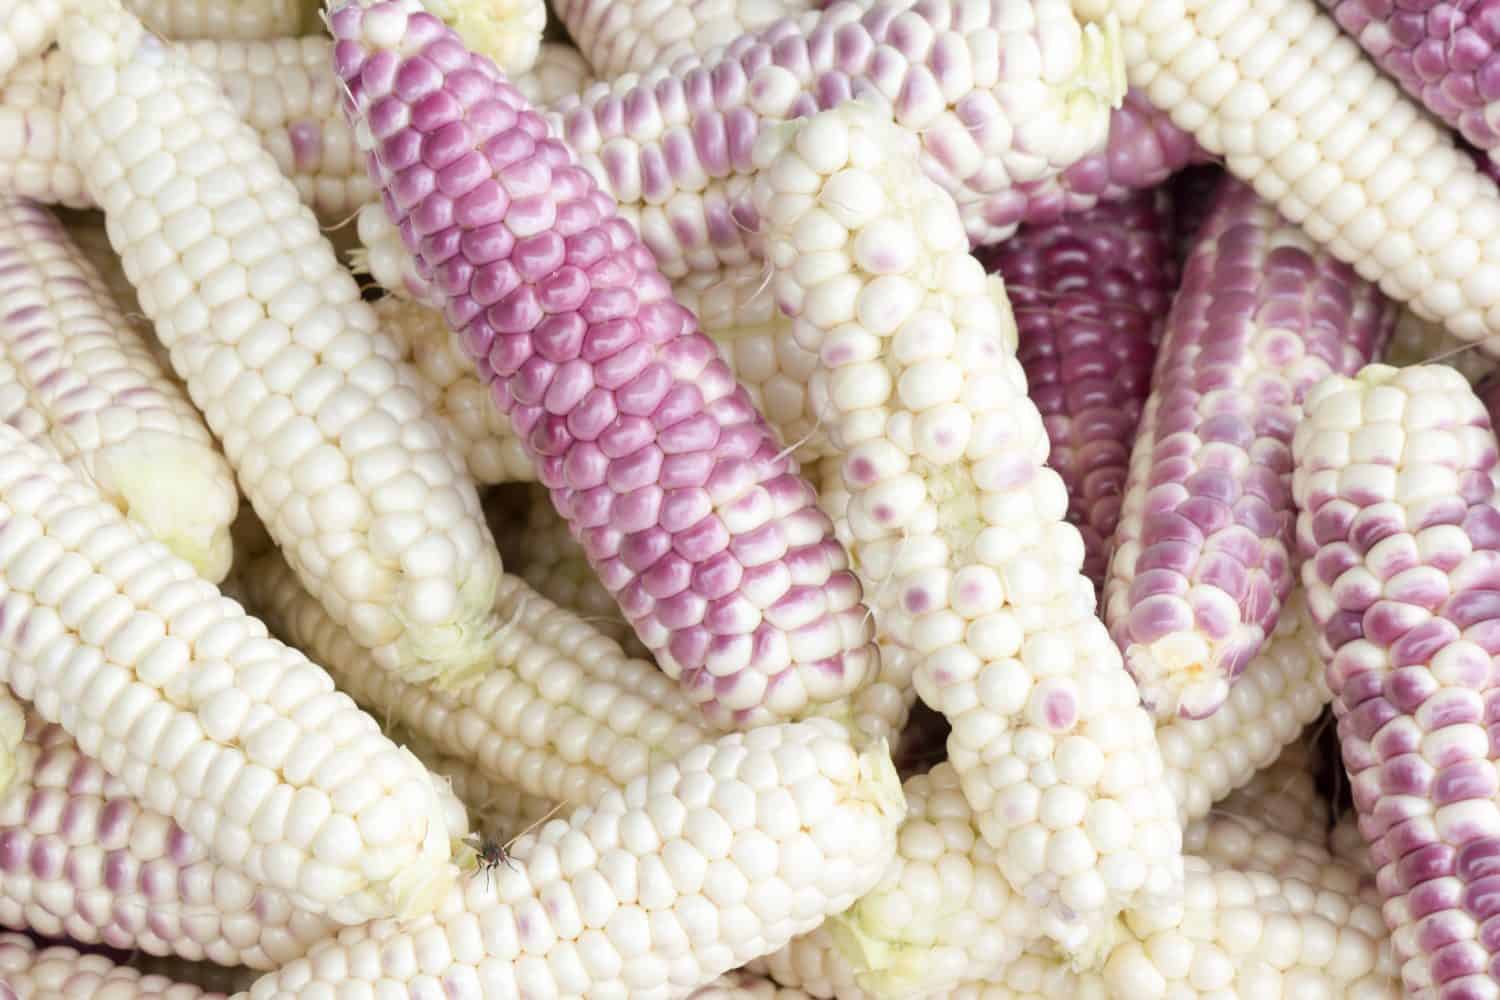 Lots of white and purple corn